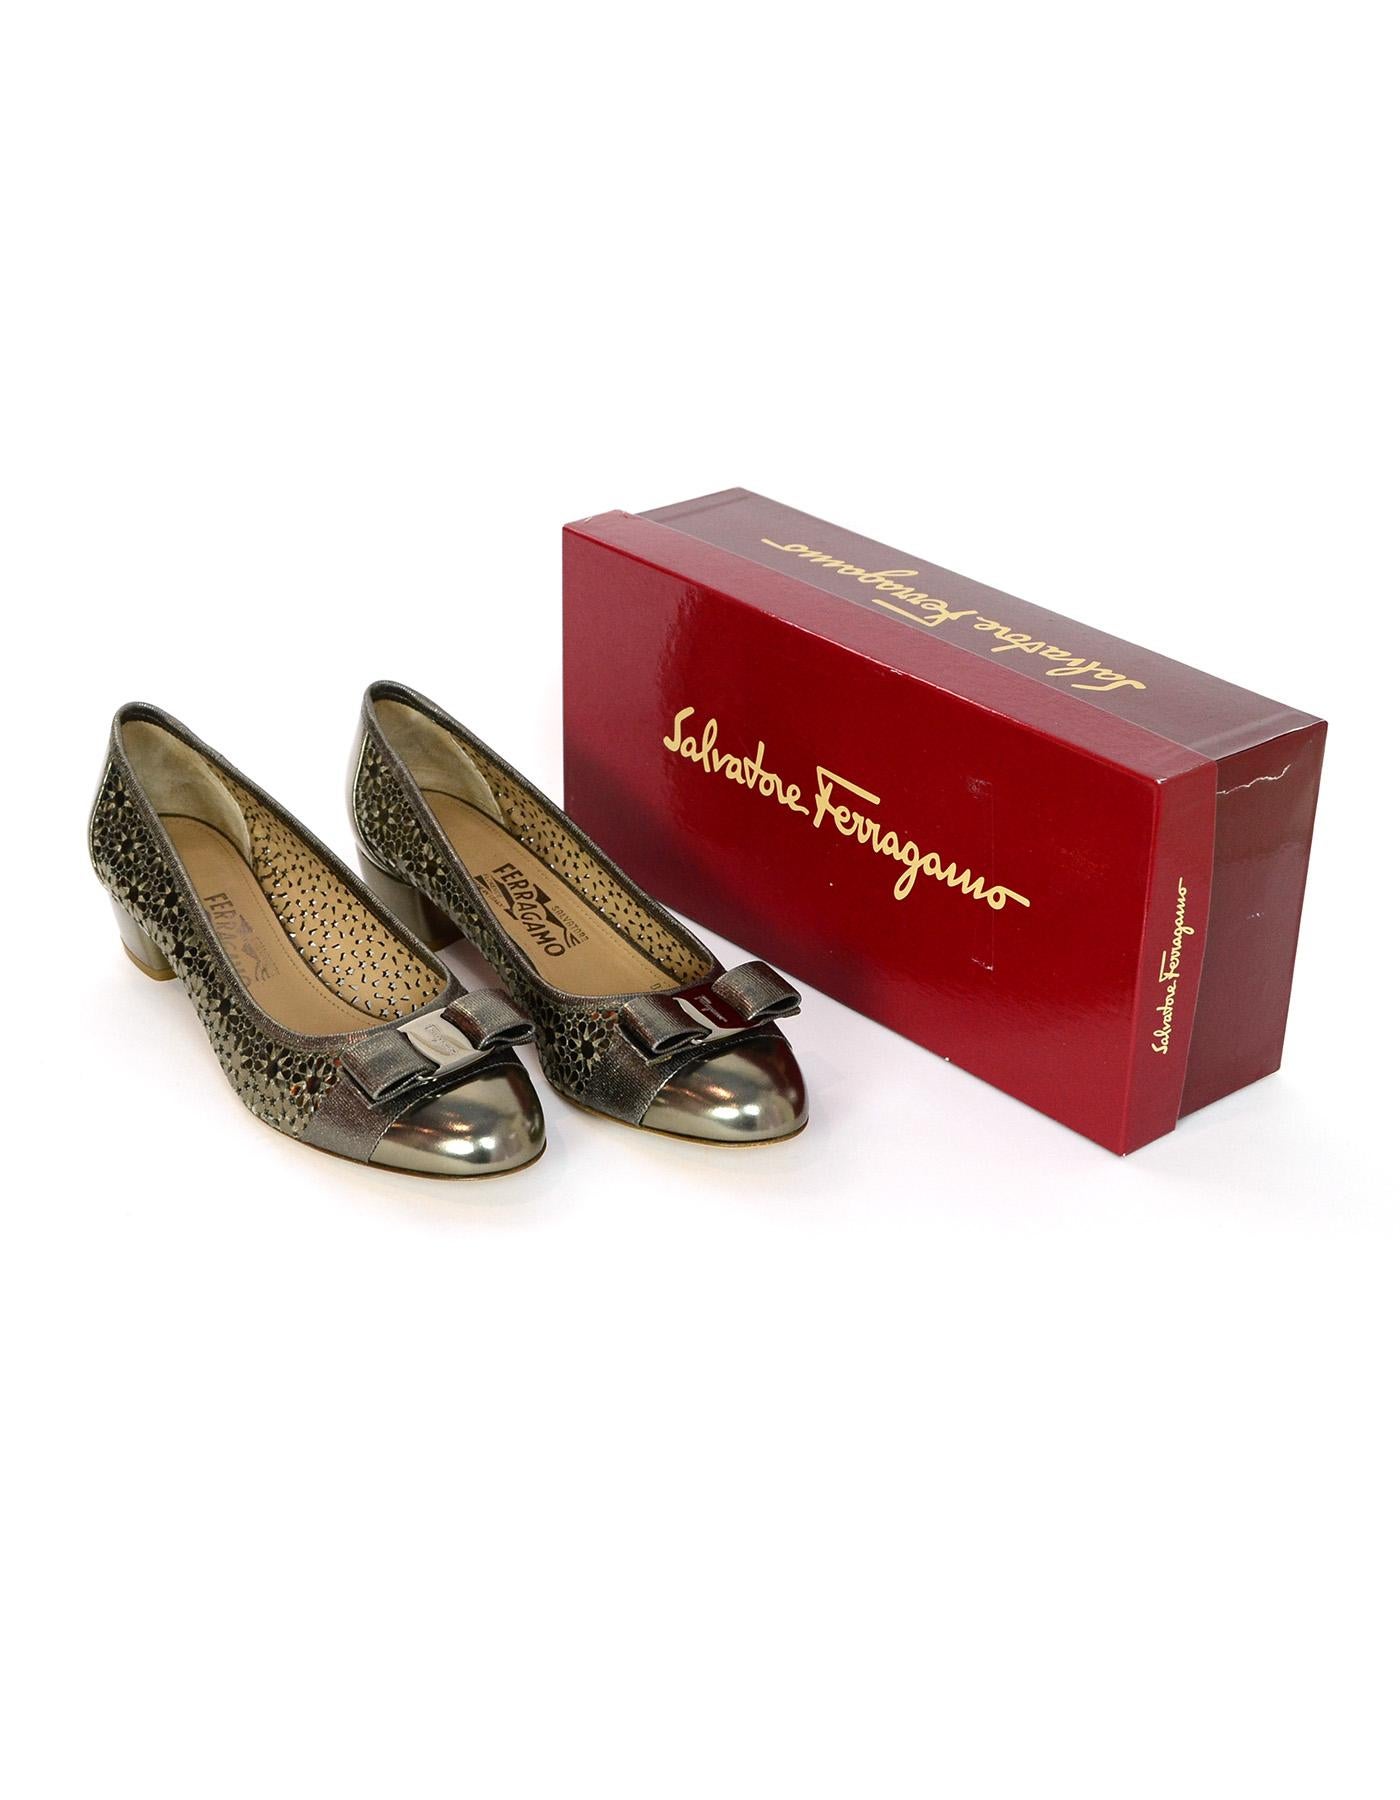 Salvatore Ferragamo Bronze Leather Laser Cut Out Side Cap Toe Shoes W/ Bow Sz 9C (Wide)

Made In: Italy
Color: Bronze
Hardware: Gunmetal
Materials: Leather and metal
Closure/Opening: Slide on
Overall Condition: Excellent pre-owned condition with